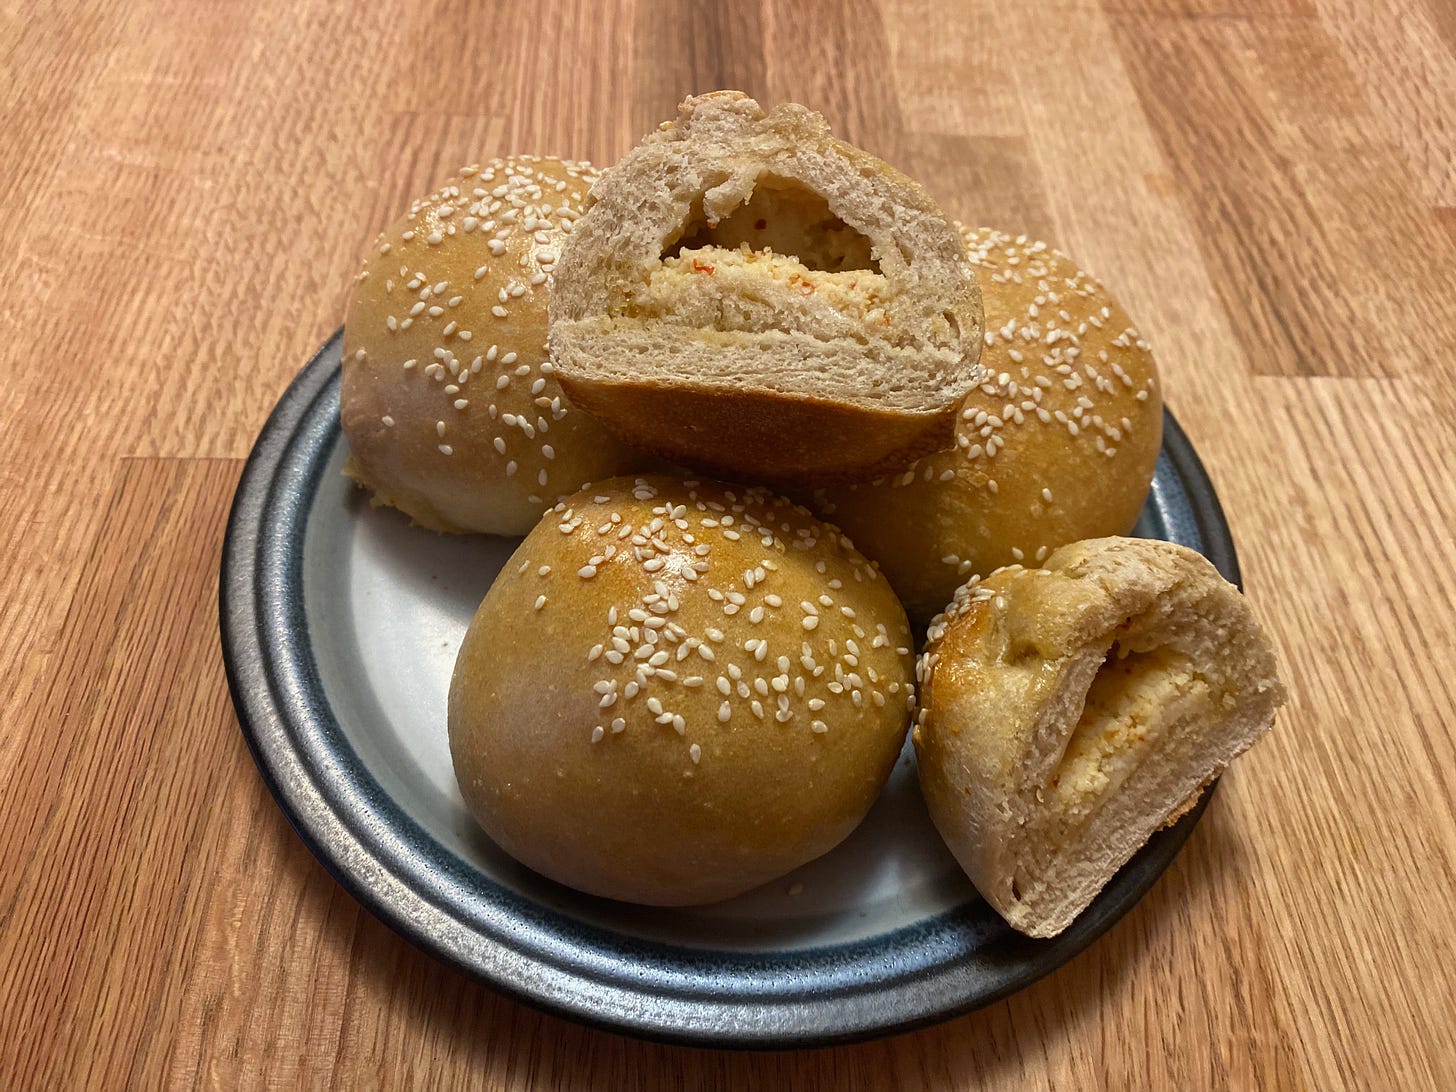 A small plate holding three golden brown buns topped with sesame seeds. A fourth bun, piled on top of the others, is cut in half, showing the feta filling.